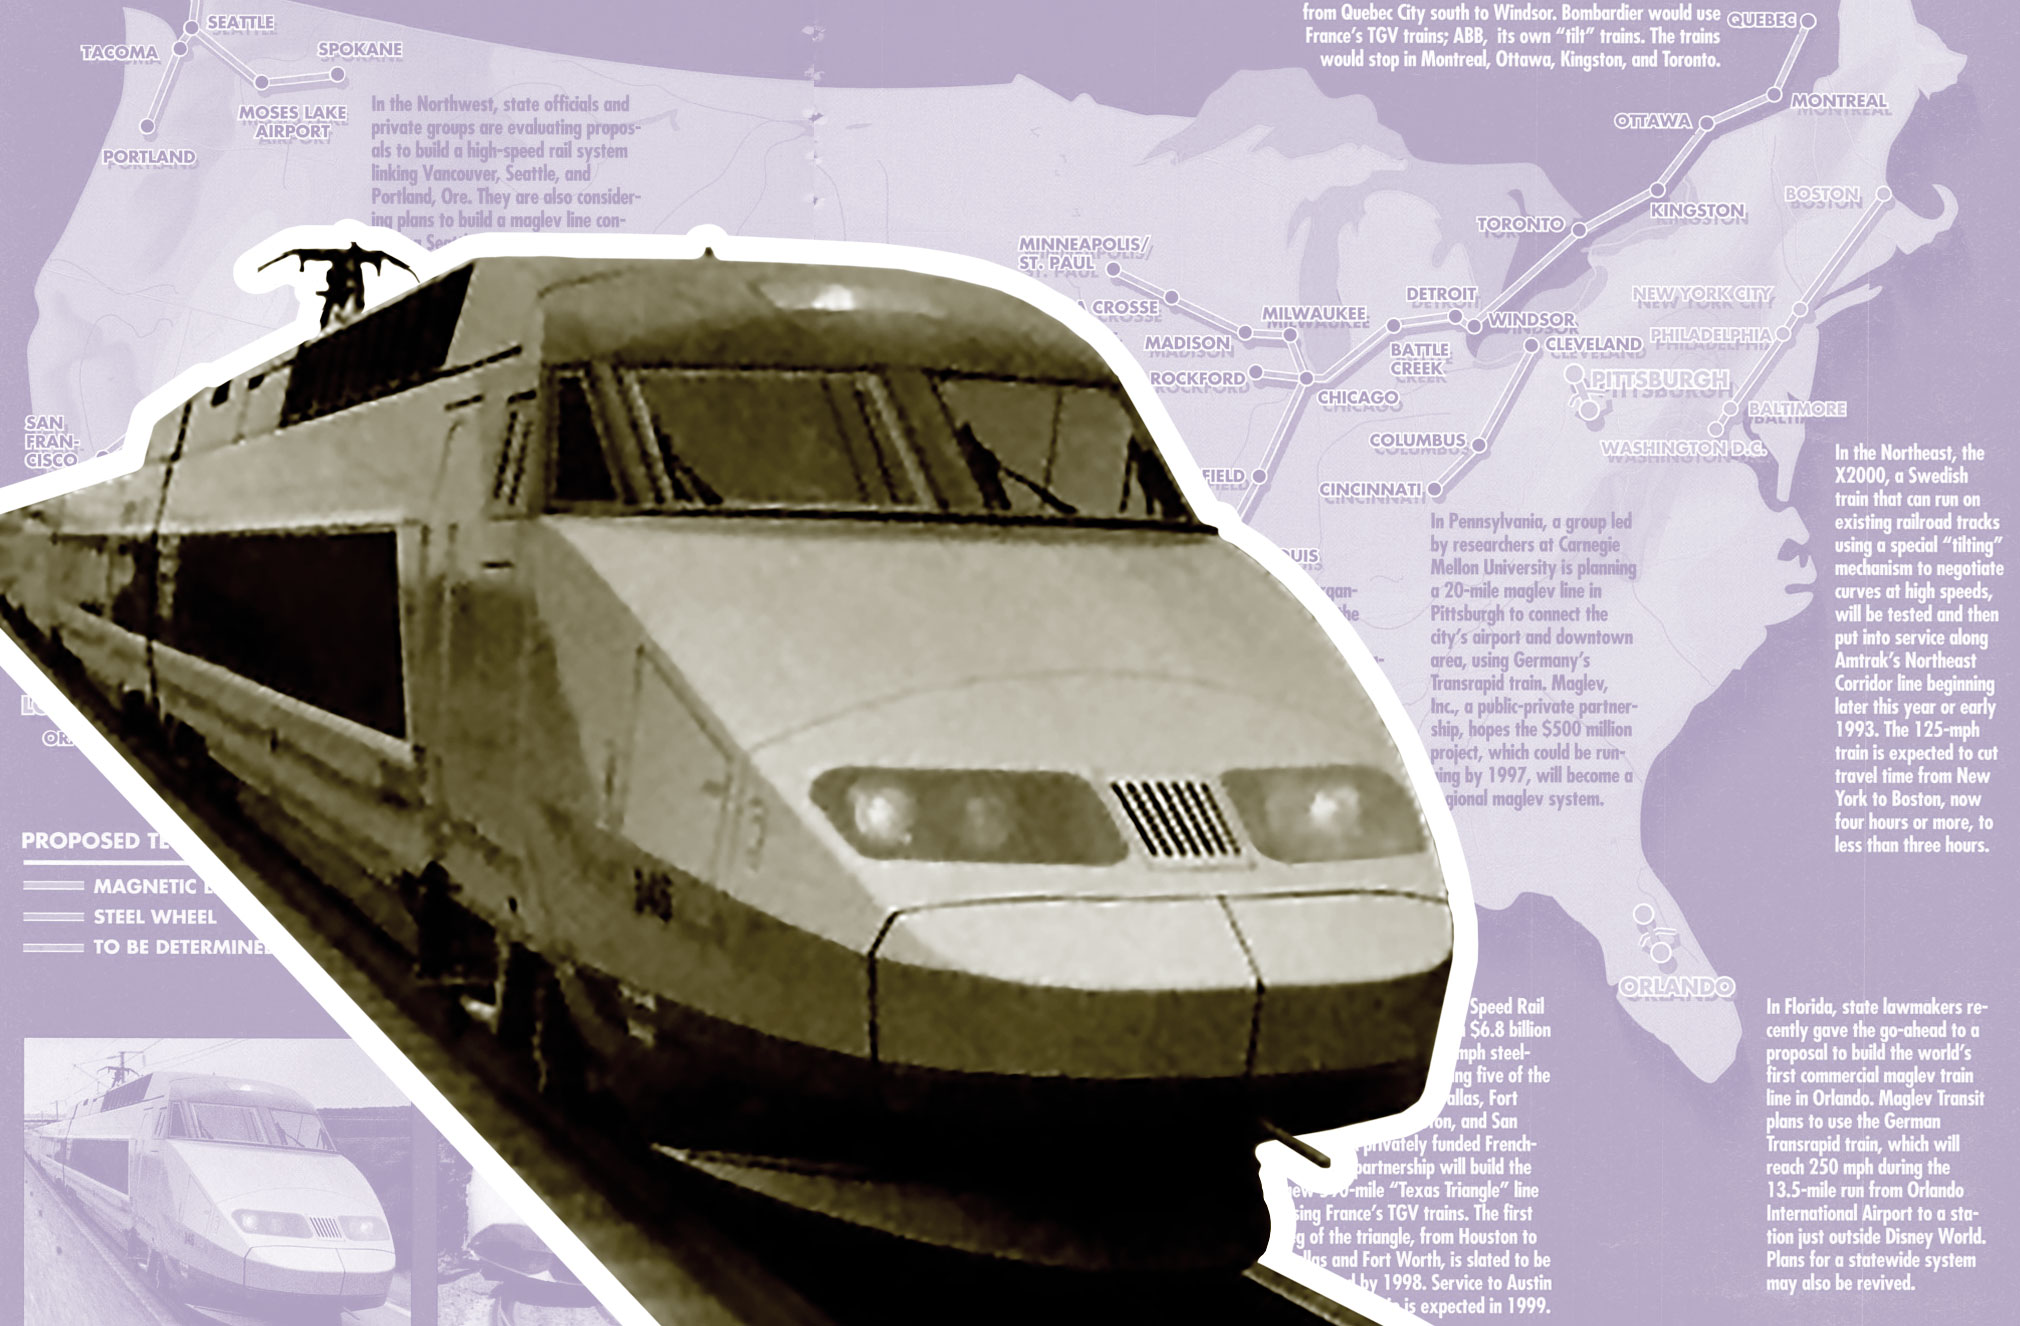 a high speed rail train in black and white over a map of US rail lines in purple in the background